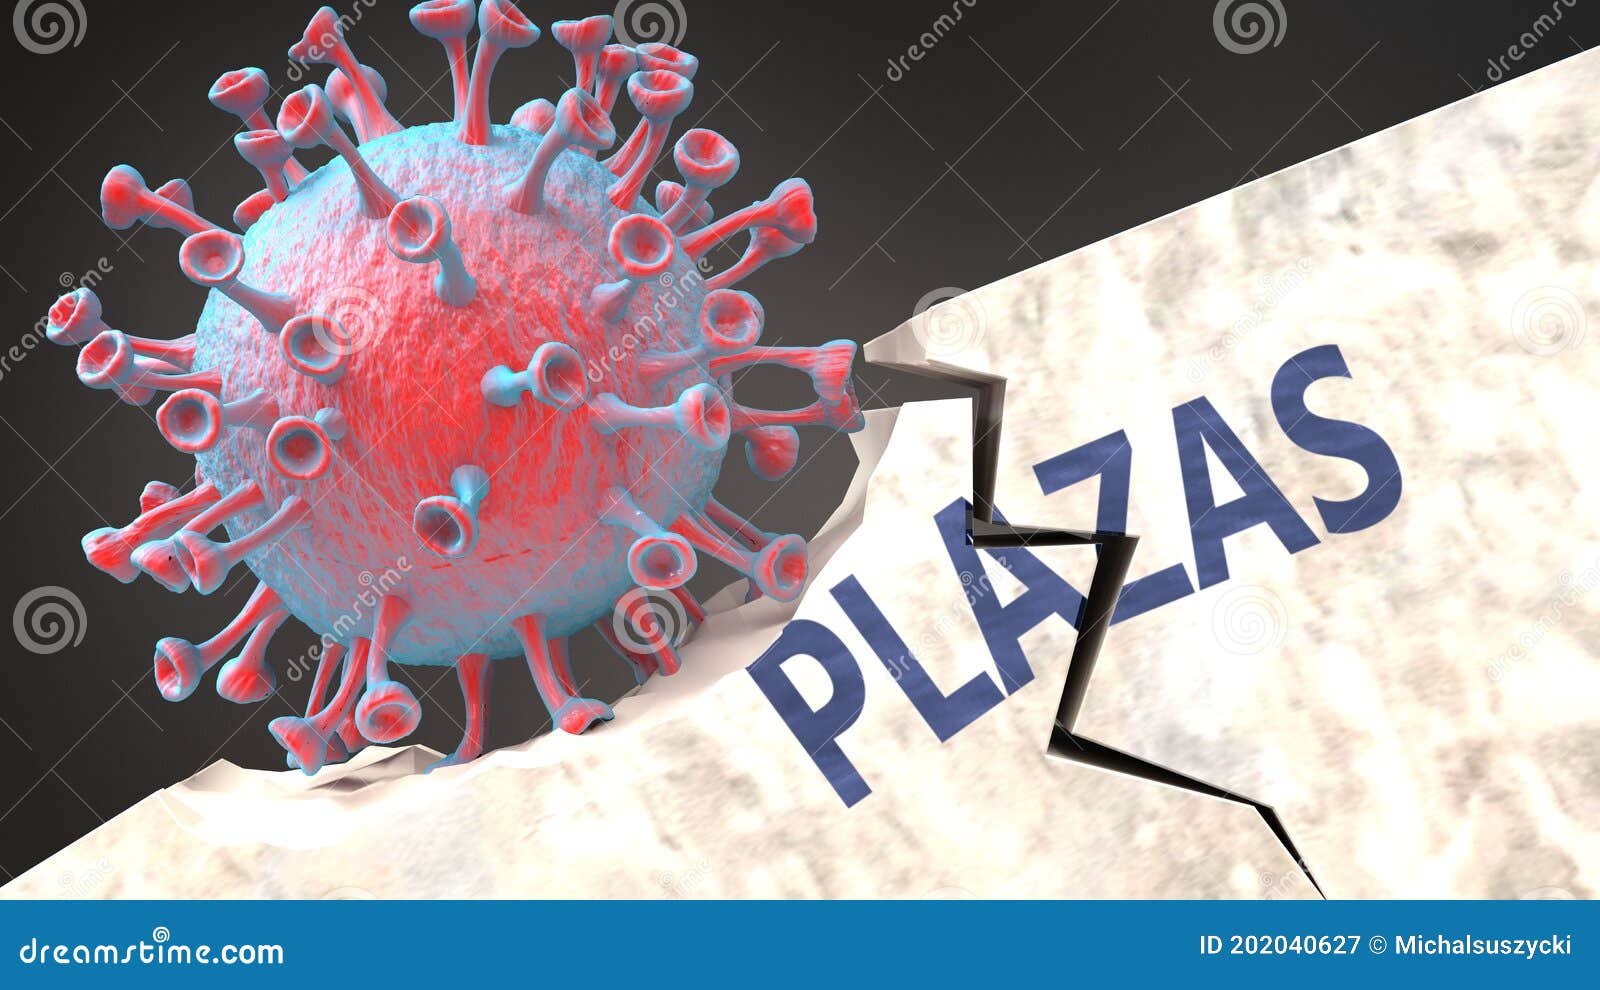 covid virus destroying plazas - big corona virus breaking a solid, sturdy and established plazas structure, to ize problems